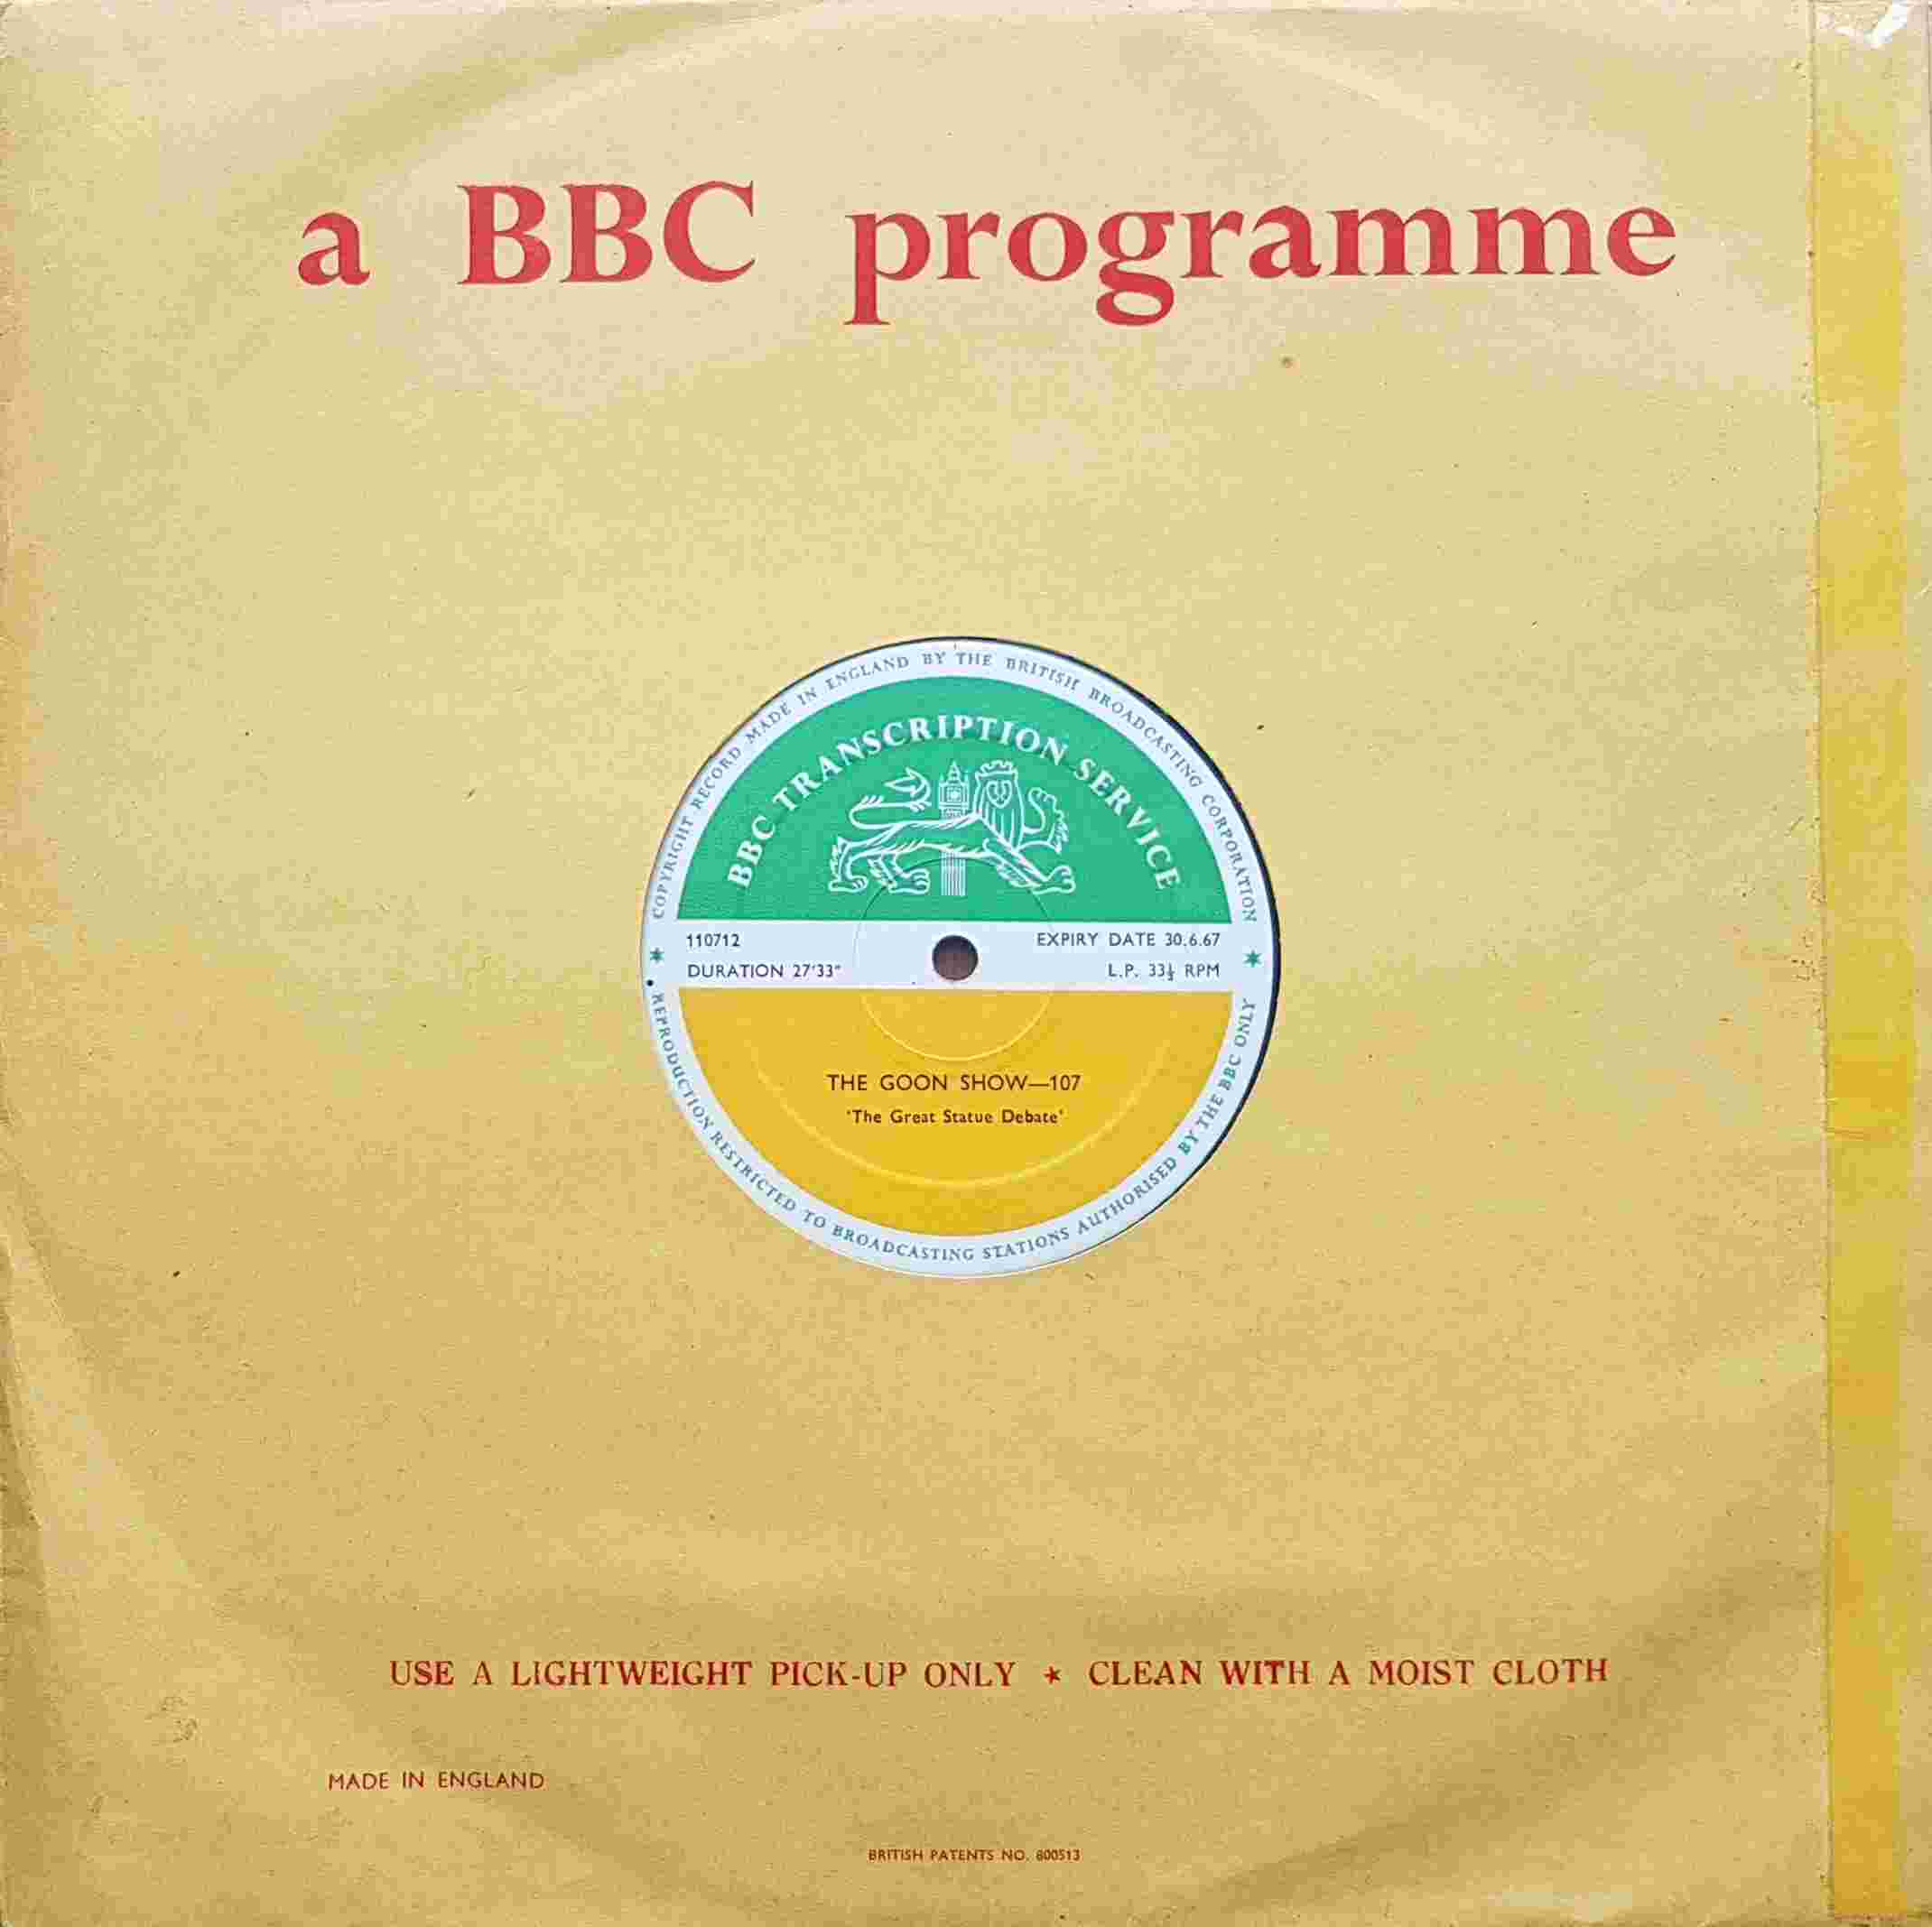 Picture of 110712 The Goon show - 107 by artist Spike Milligan / John Antrobus from the BBC albums - Records and Tapes library